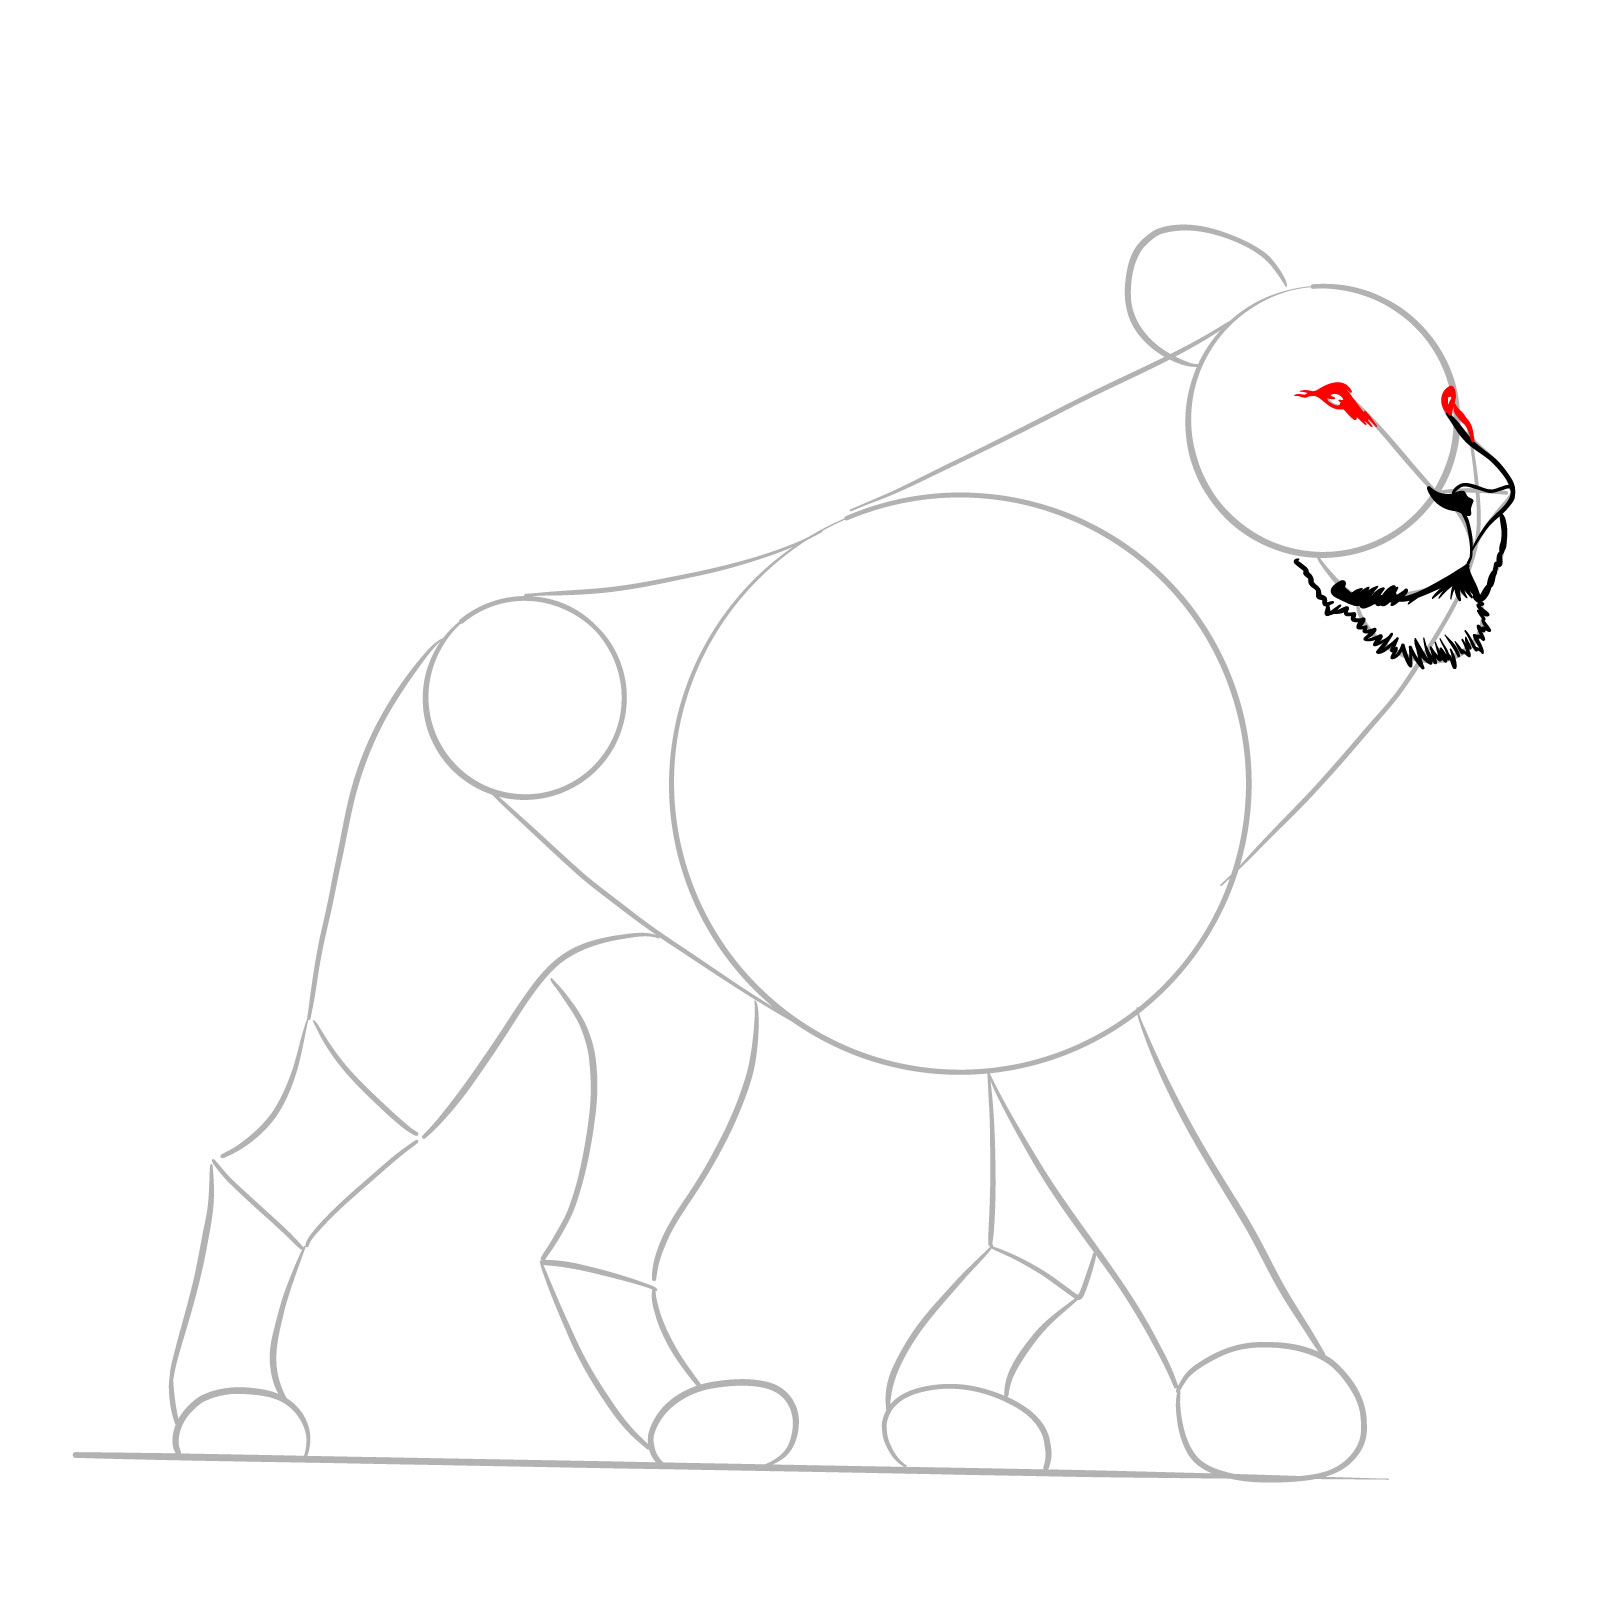 Walking lion drawing with eye detailing steps - step 05